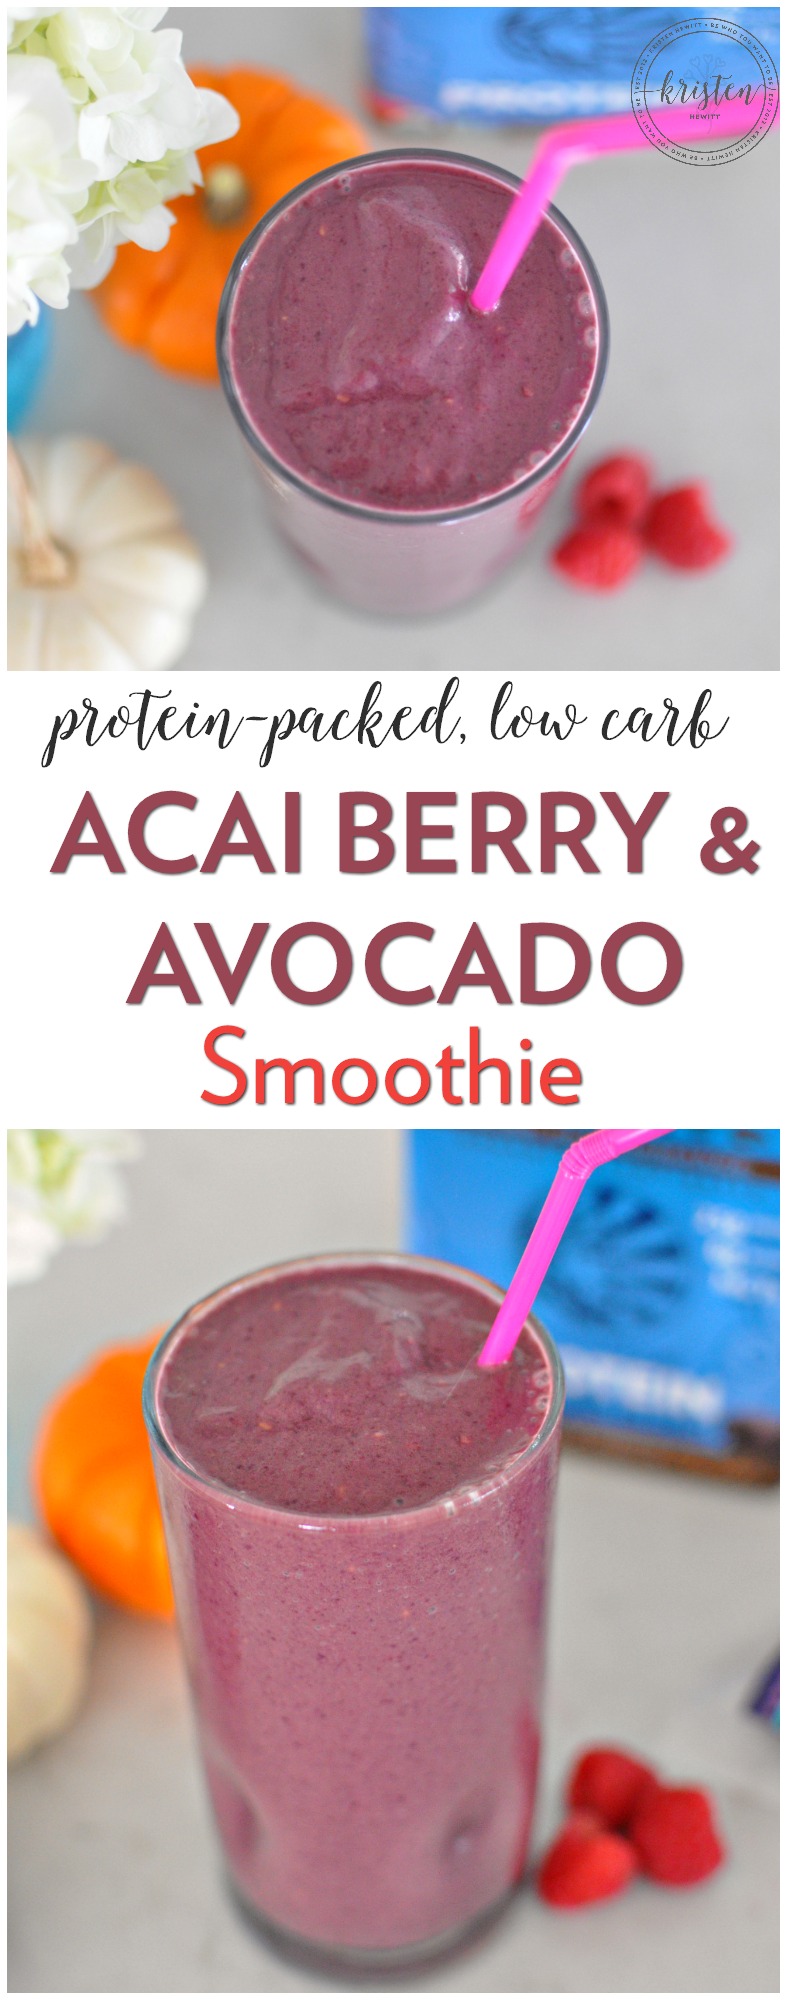 Watching your carbs and sugar intake but miss smoothies? Then try this acai berry and avocado smoothie. It's low carb, protein-packed, and delish!